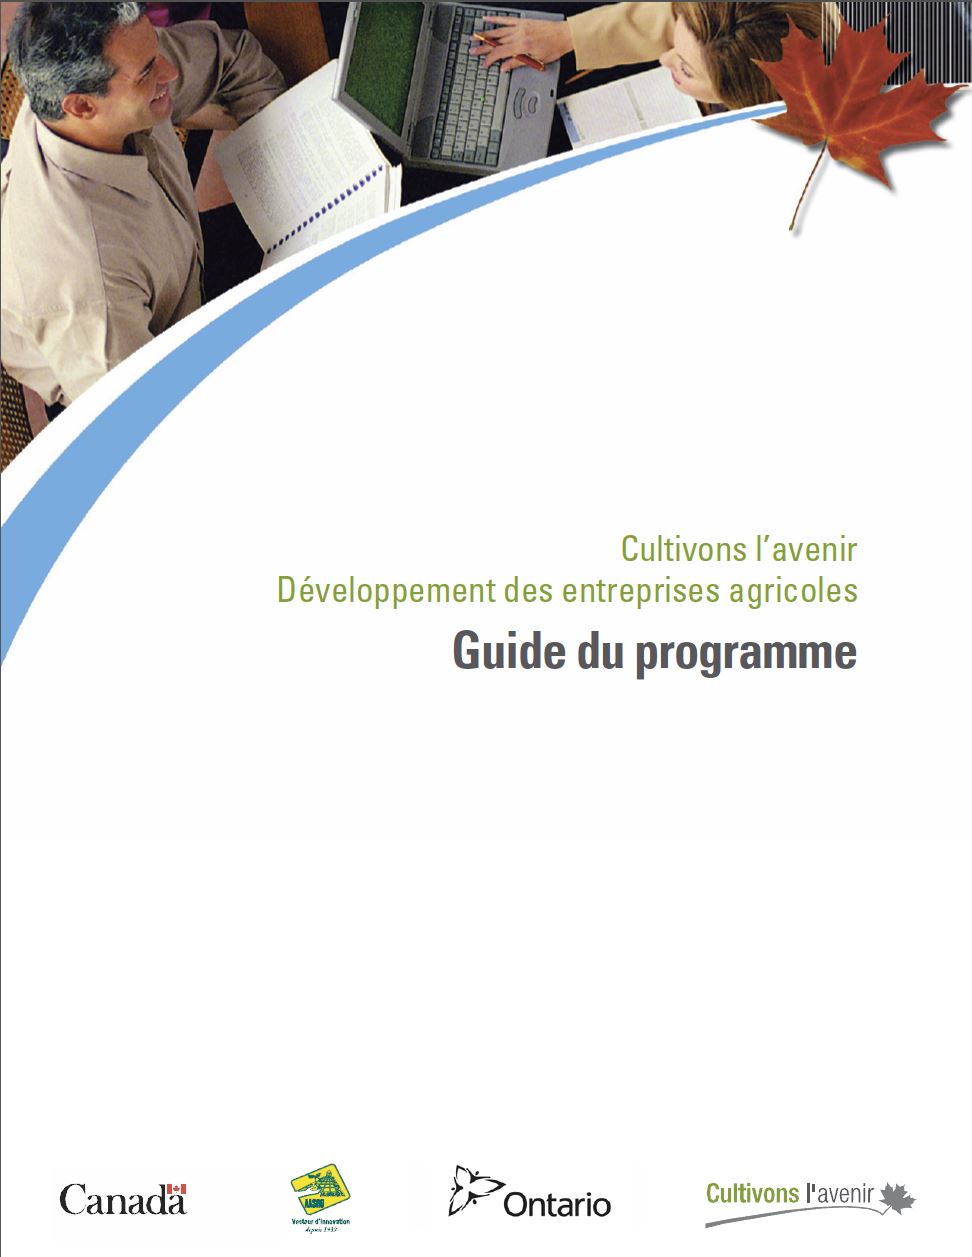 Image of a Program Guide cover page in French